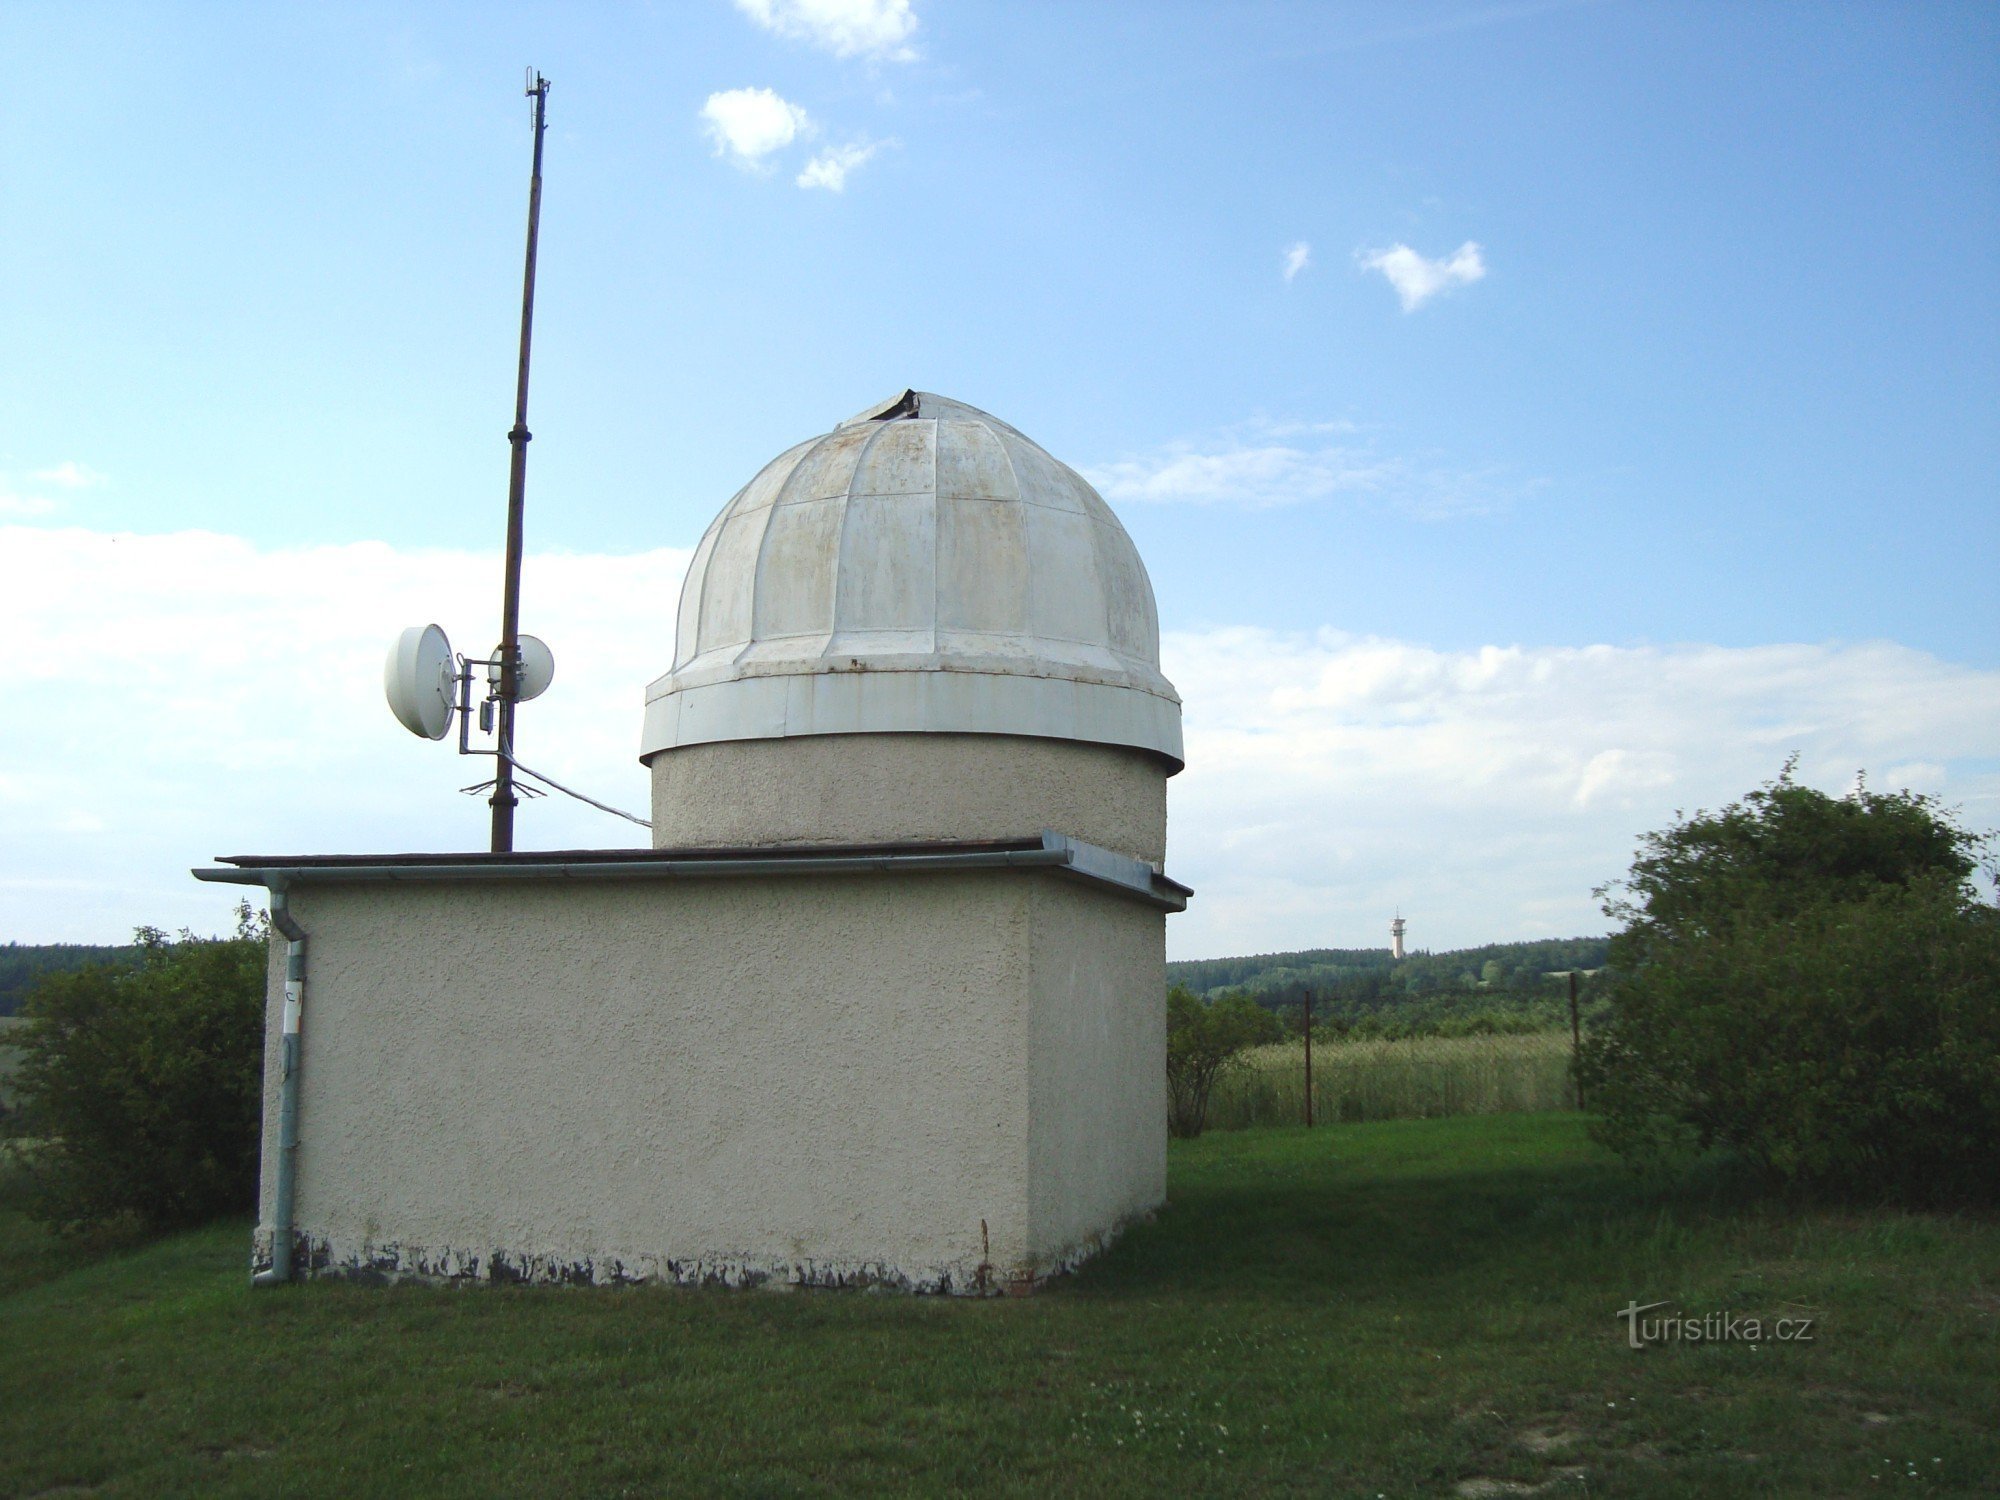 Lošov - the observatory of Josef Sienel from 1955 and the telecommunication tower above Radíkov - Photo: Ulrych Mir.